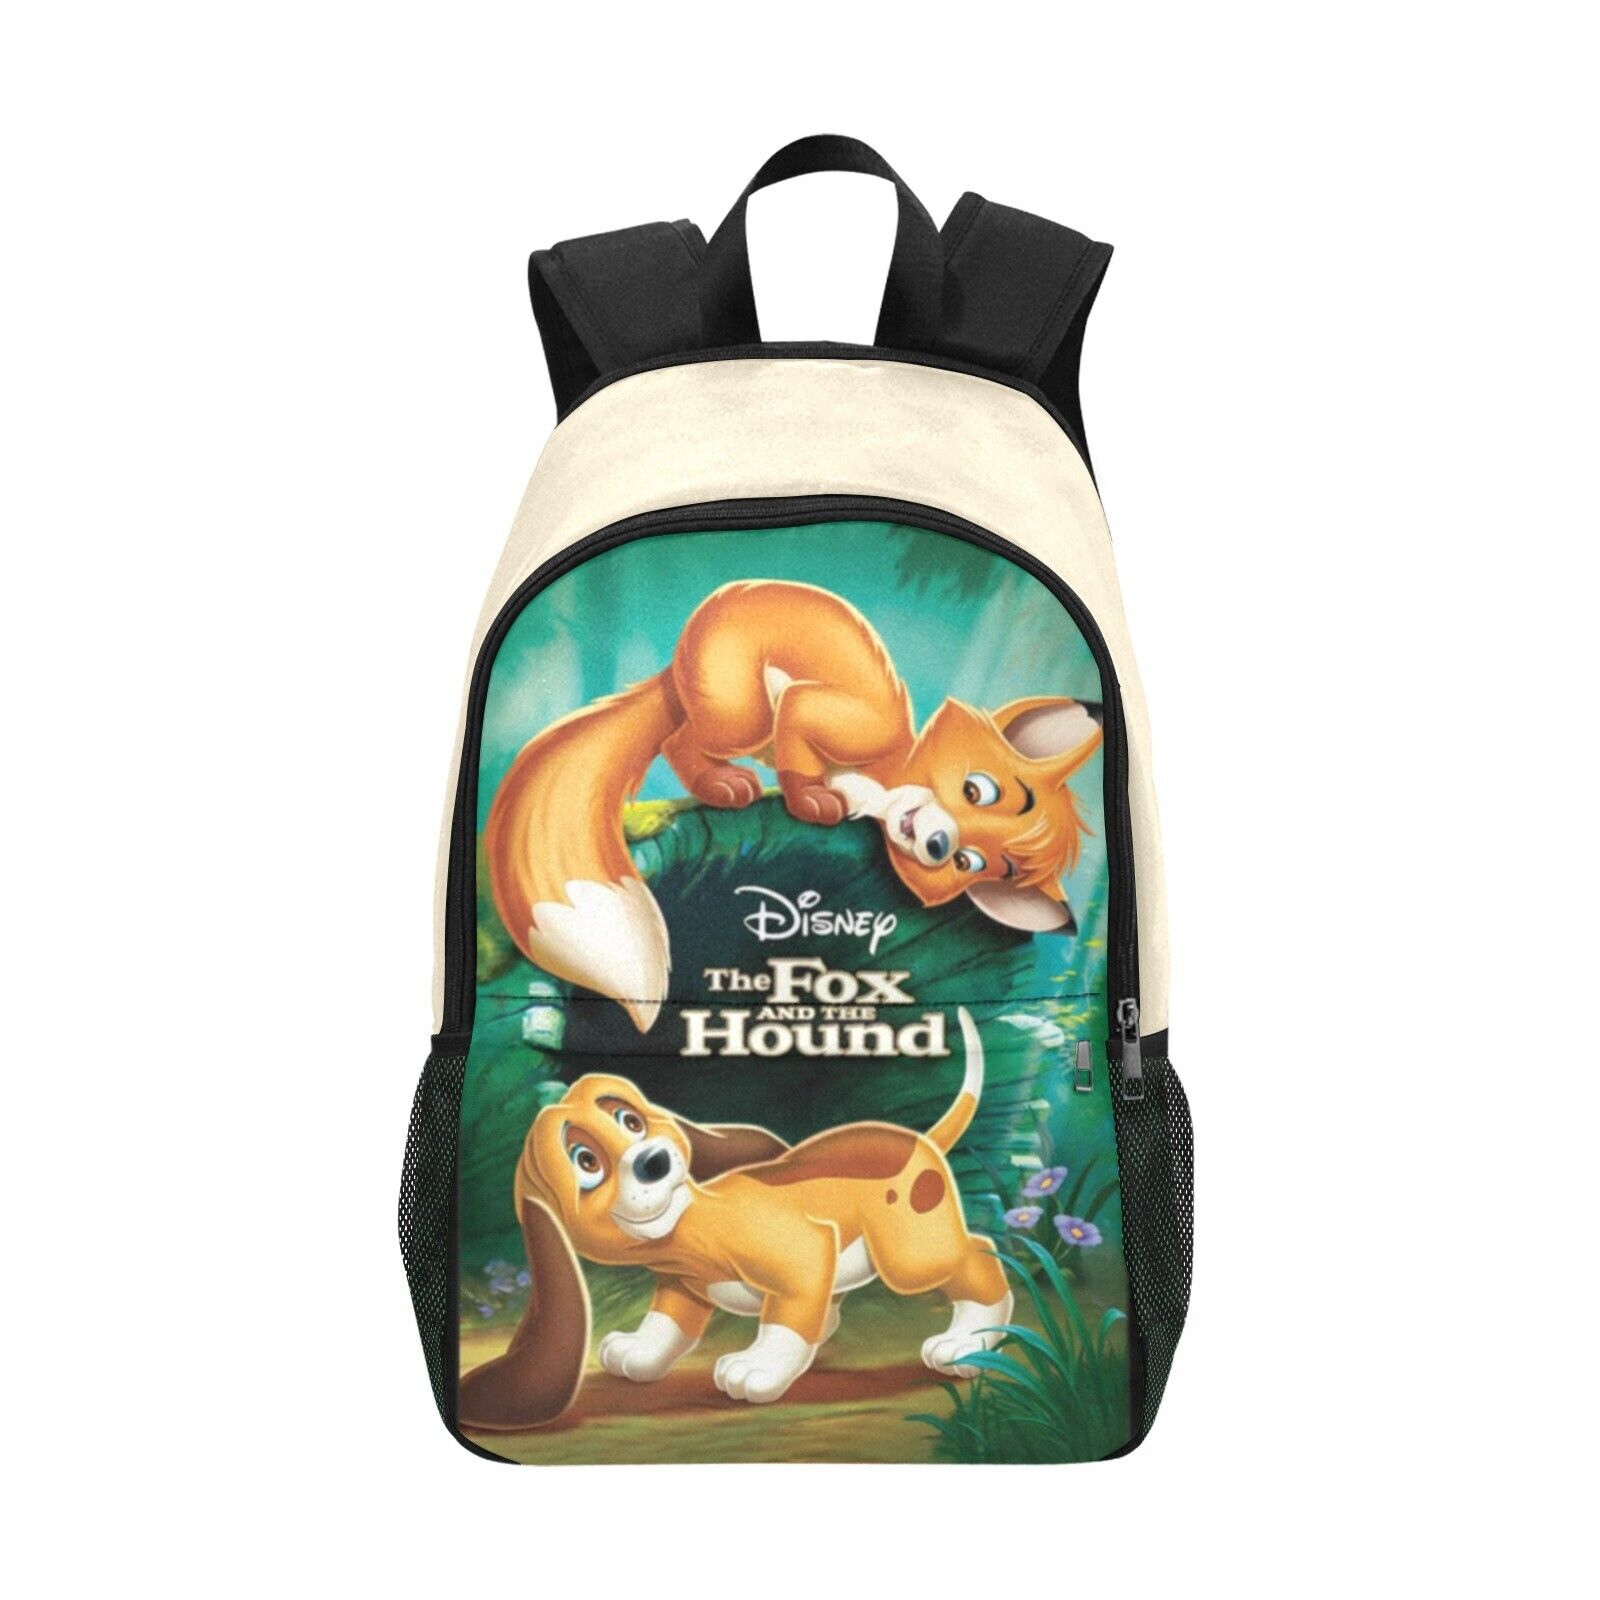 Disney The Fox and the Hound Adult Backpack, Retro Backpack, Laptop Backpack